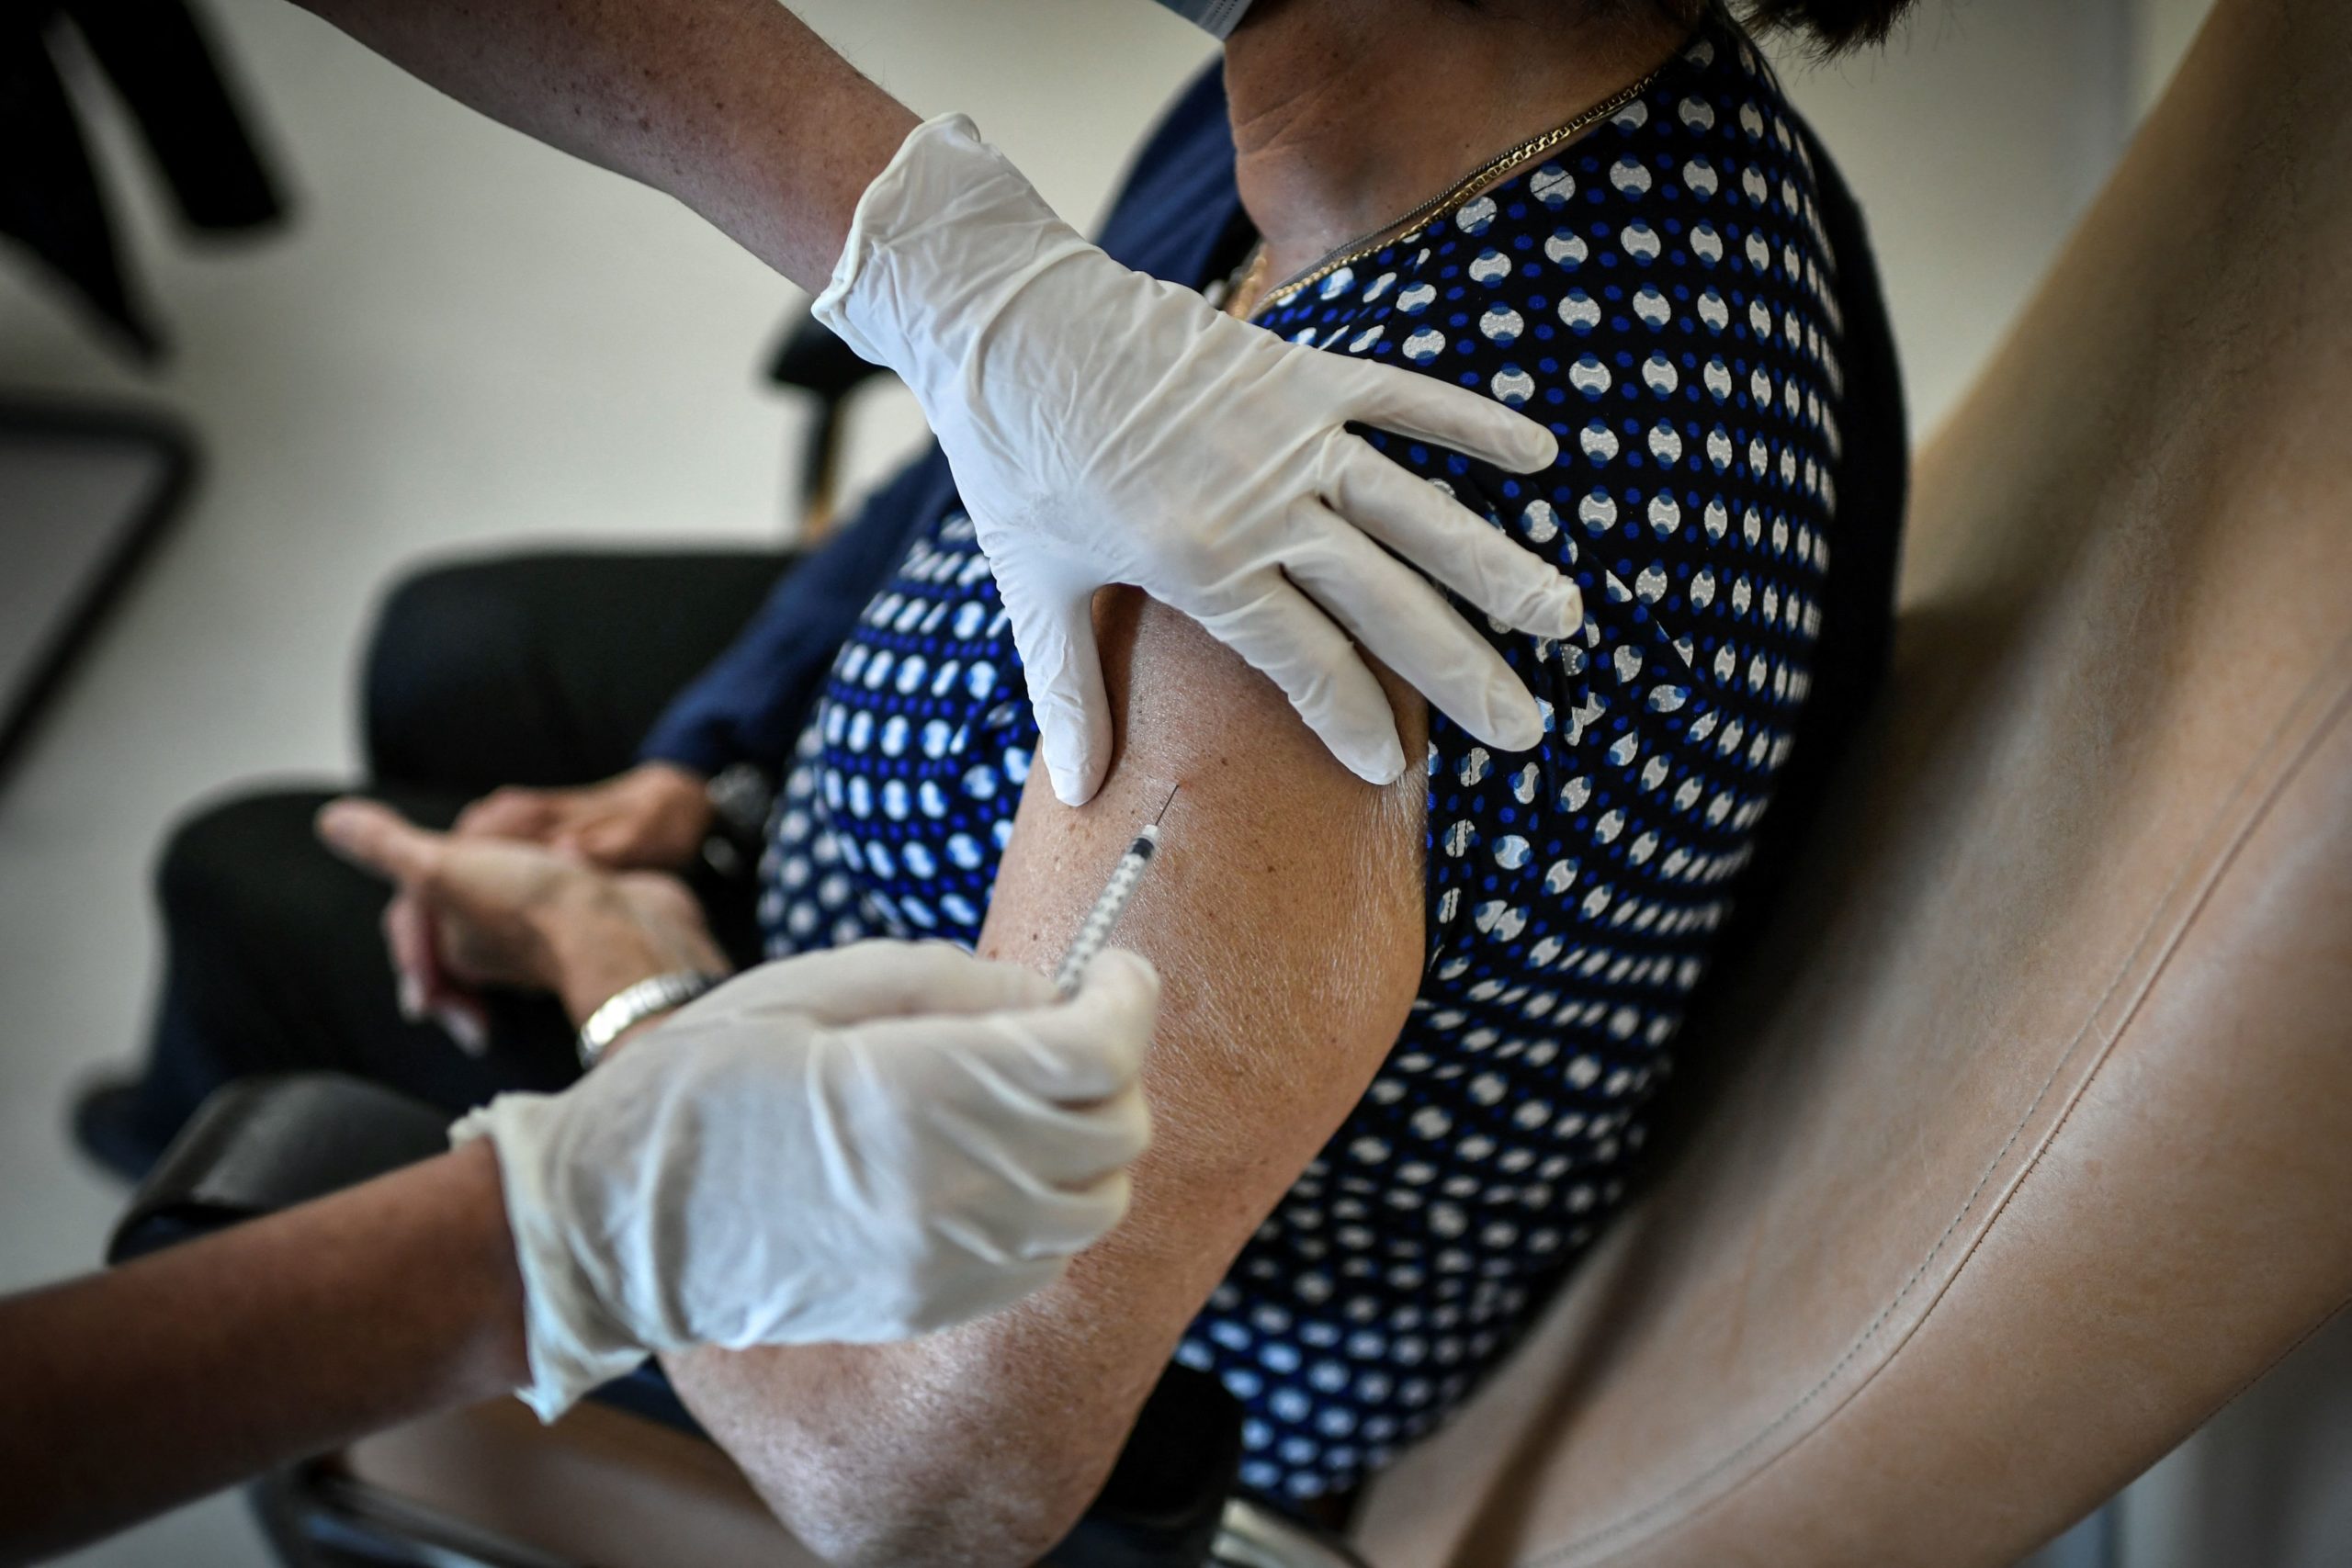 A woman receives a dose of the Pfizer-BioNTech vaccine against the Covid-19 at Begin military hospital in Saint-Mande, east of Paris, a day after the vaccination by military personnel started in the country on April 7, 2021. (Photo by STEPHANE DE SAKUTIN / AFP) (Photo by STEPHANE DE SAKUTIN/AFP via Getty Images)